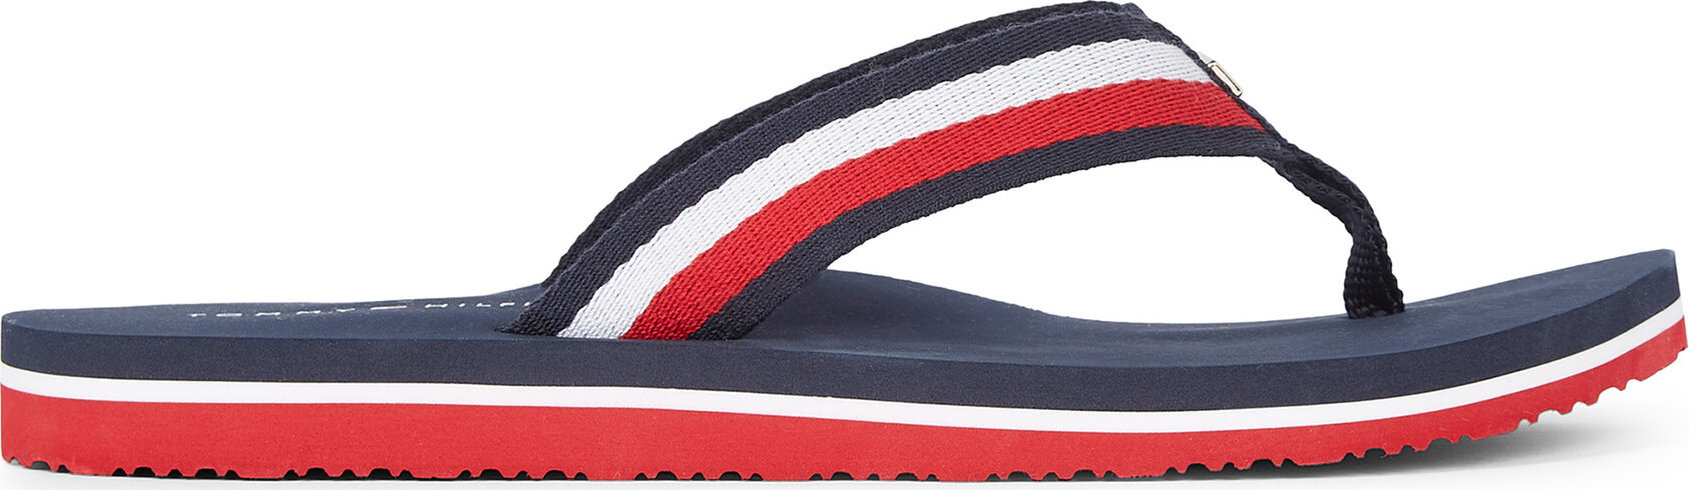 Žabky Tommy Hilfiger Corporate Beach Sandal FW0FW07986 Red White Blue 0G0